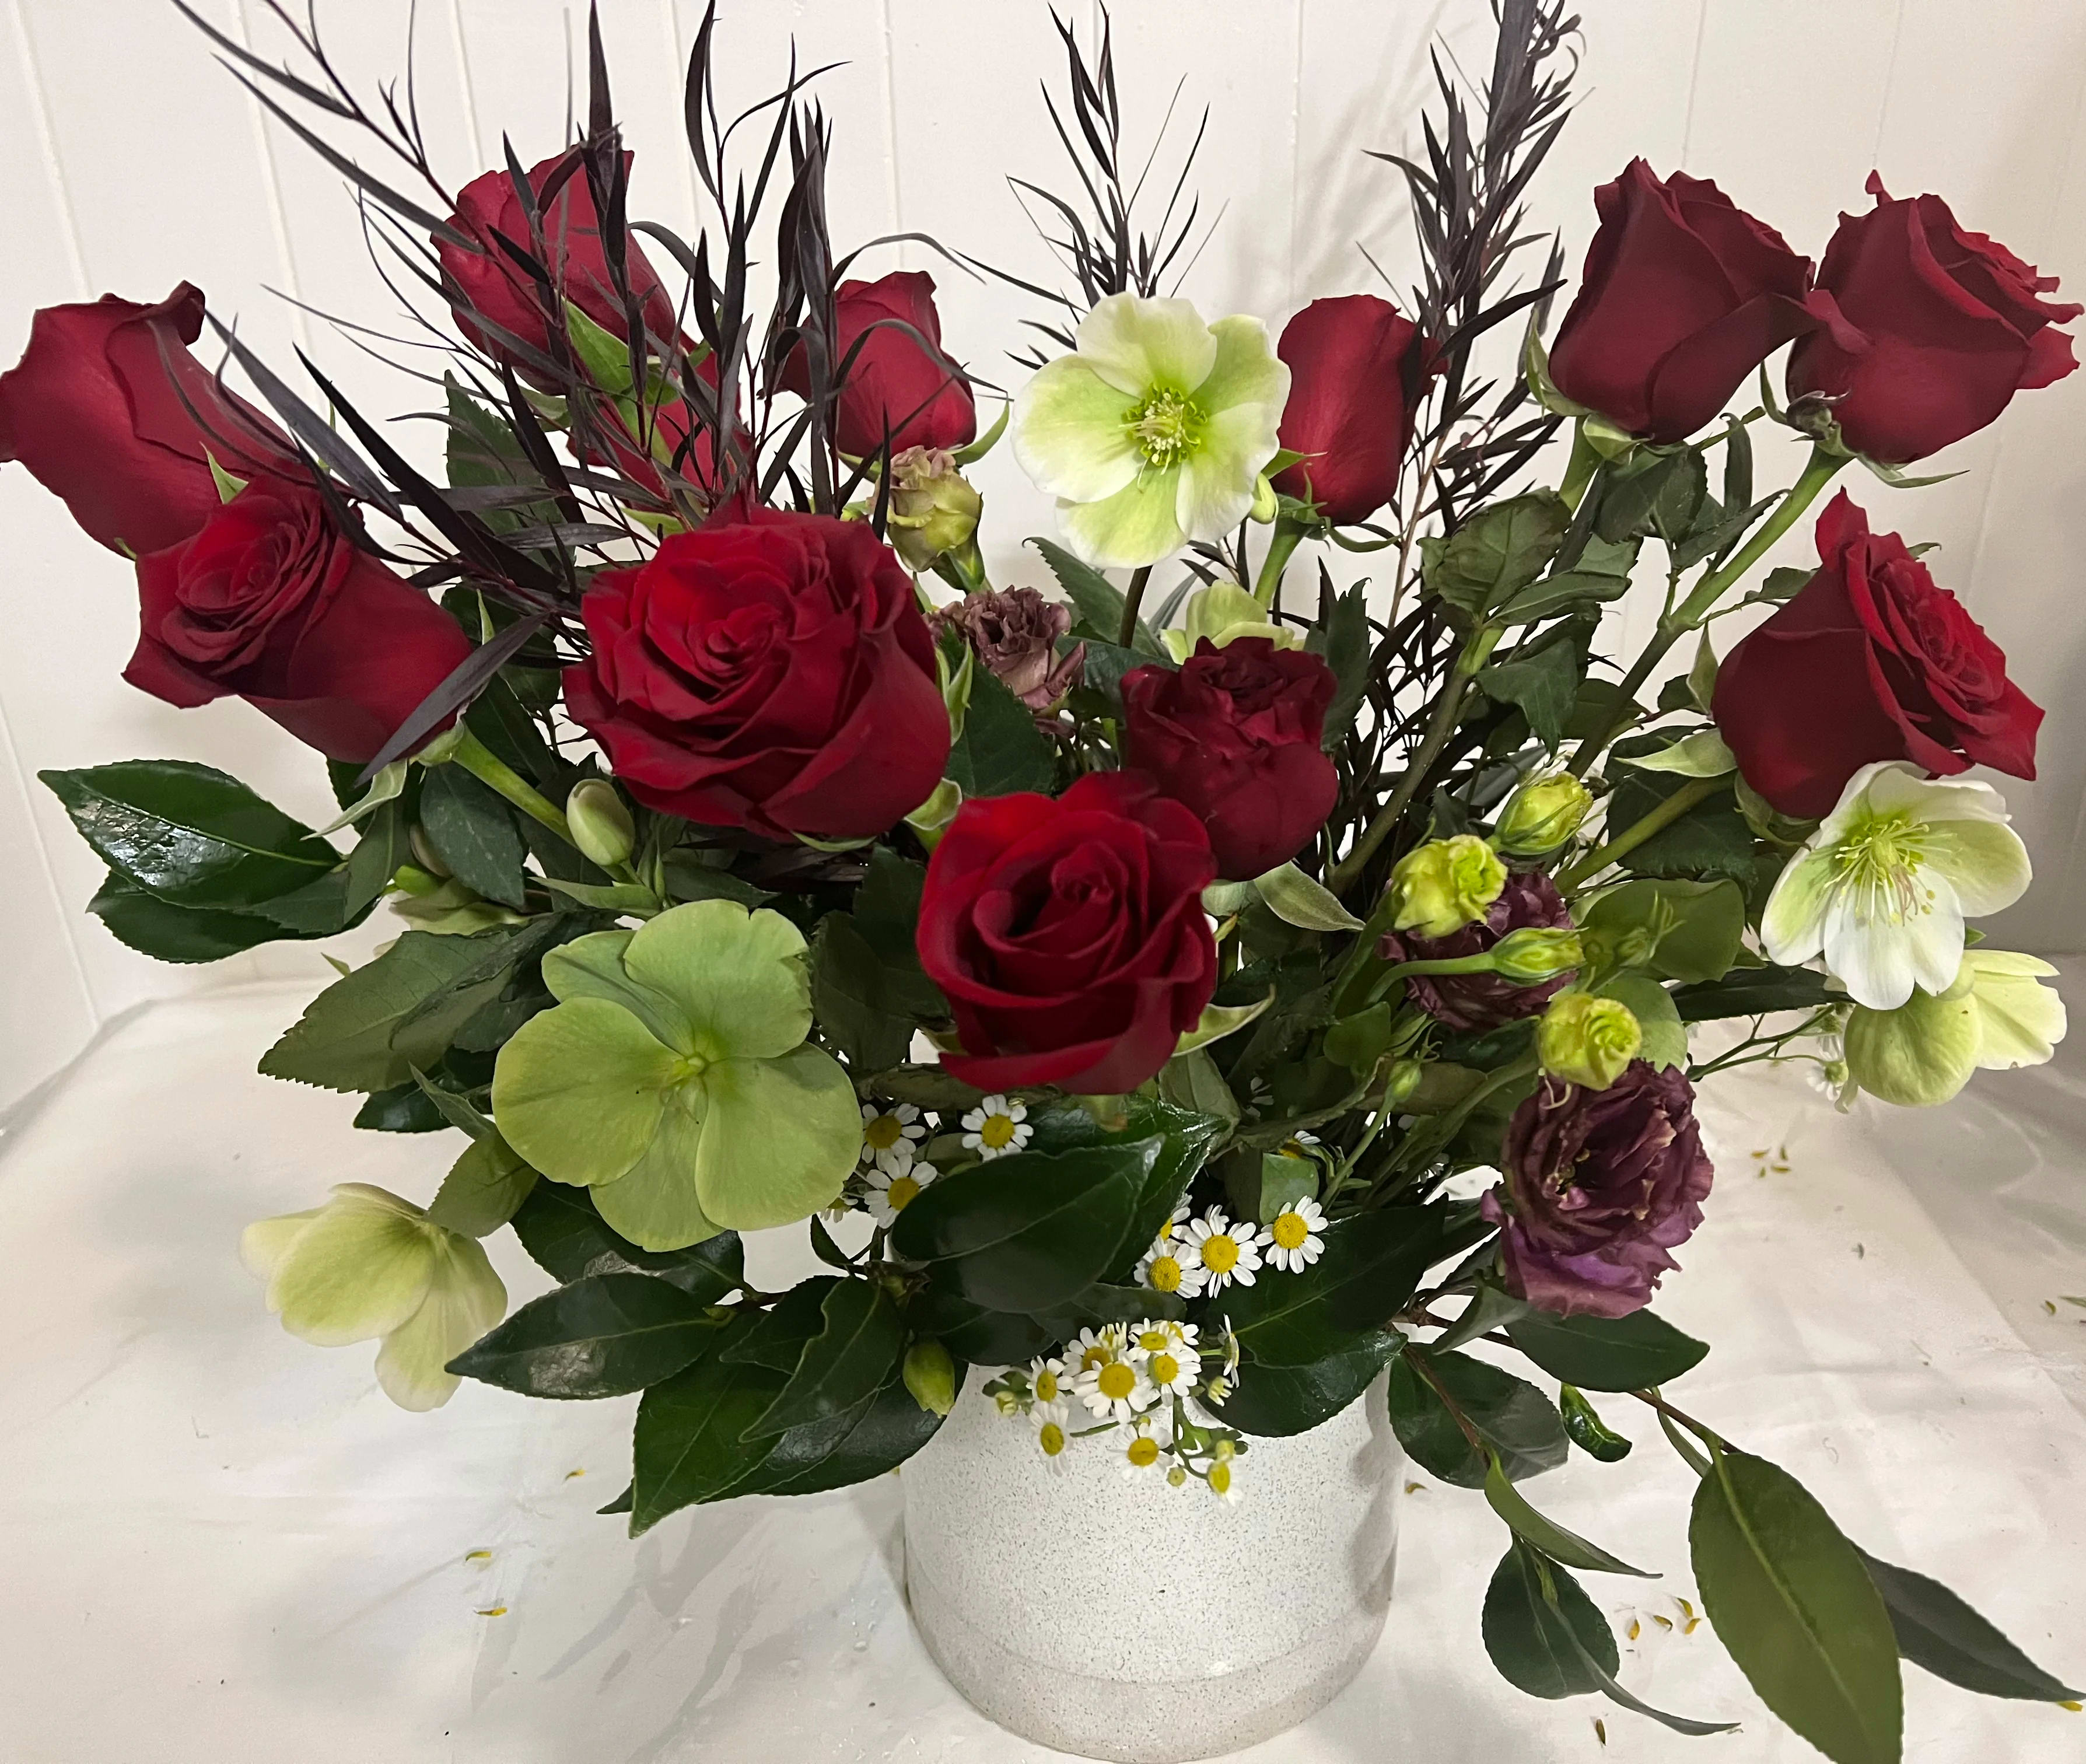 Lush Dozen Red Roses - A dozen (12 stems) of red roses, adorned with seasonal greenery, foliage, and accents designed in an English-garden style and presented in a ceramic vase.